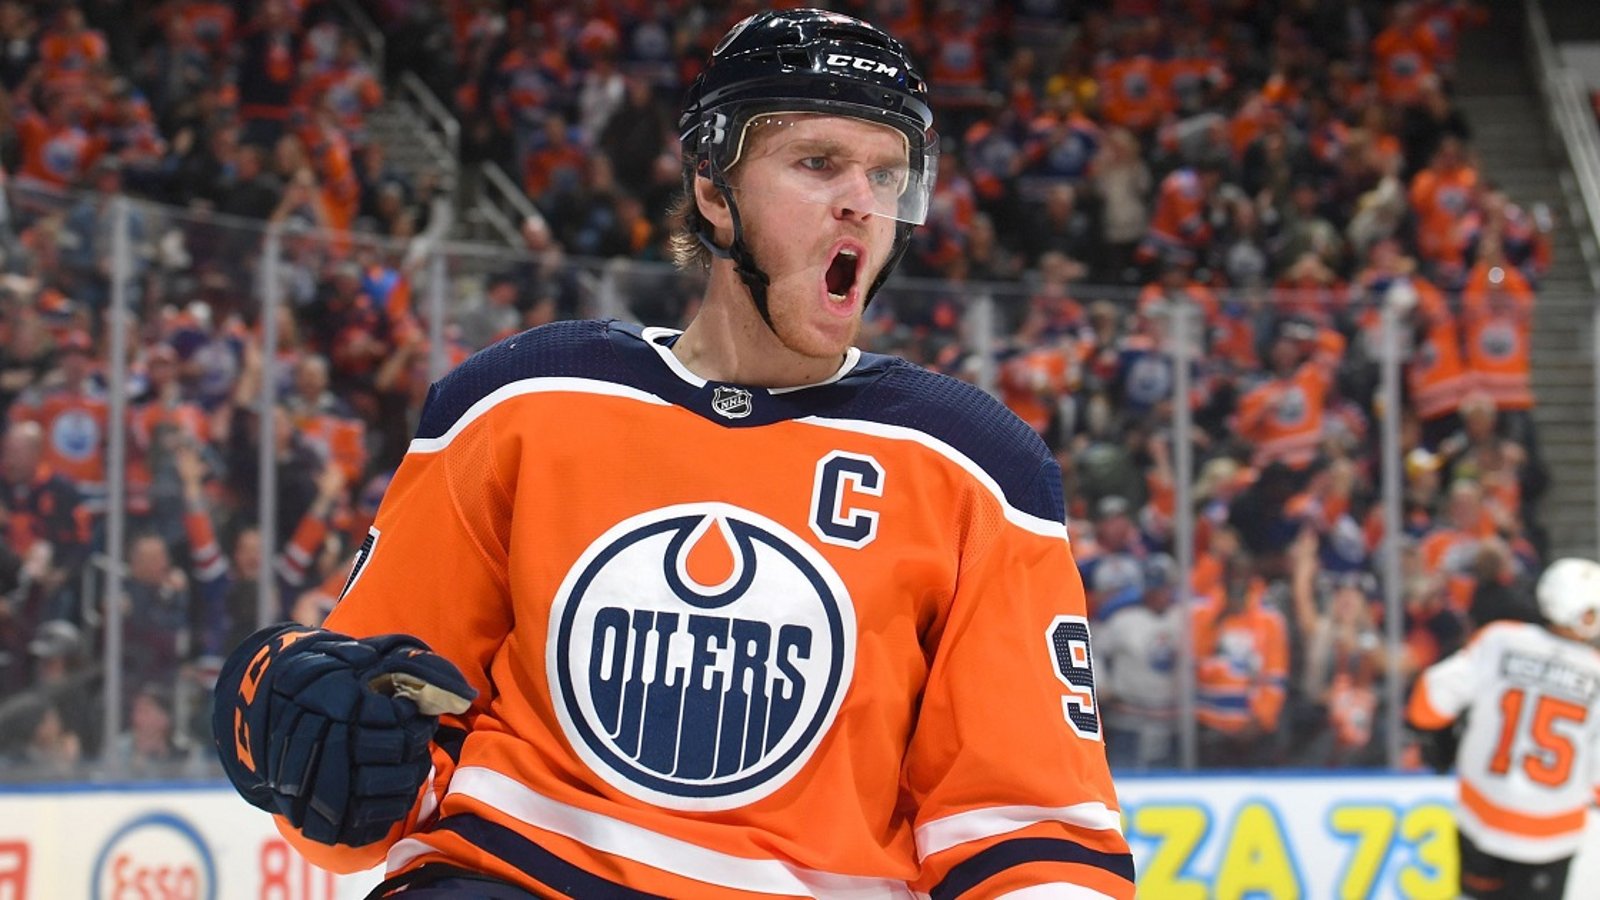 NHL accused of rigging games for Connor McDavid?